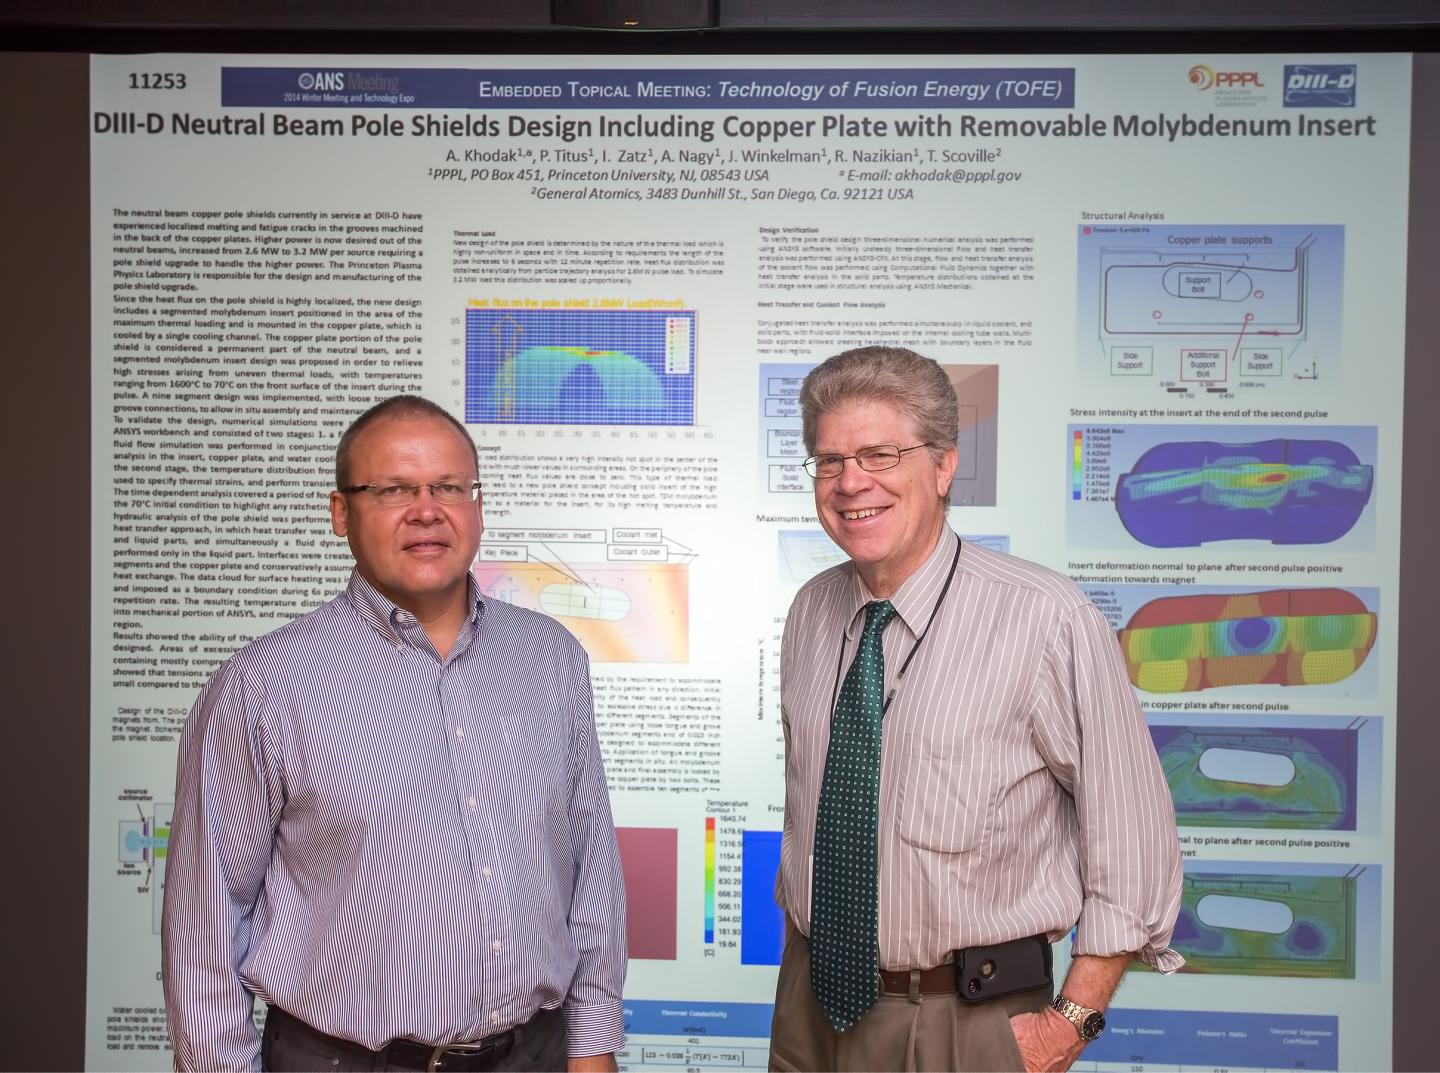 Engineers Andrei Khodak and Irving Zatz with Poster for Pole Shields